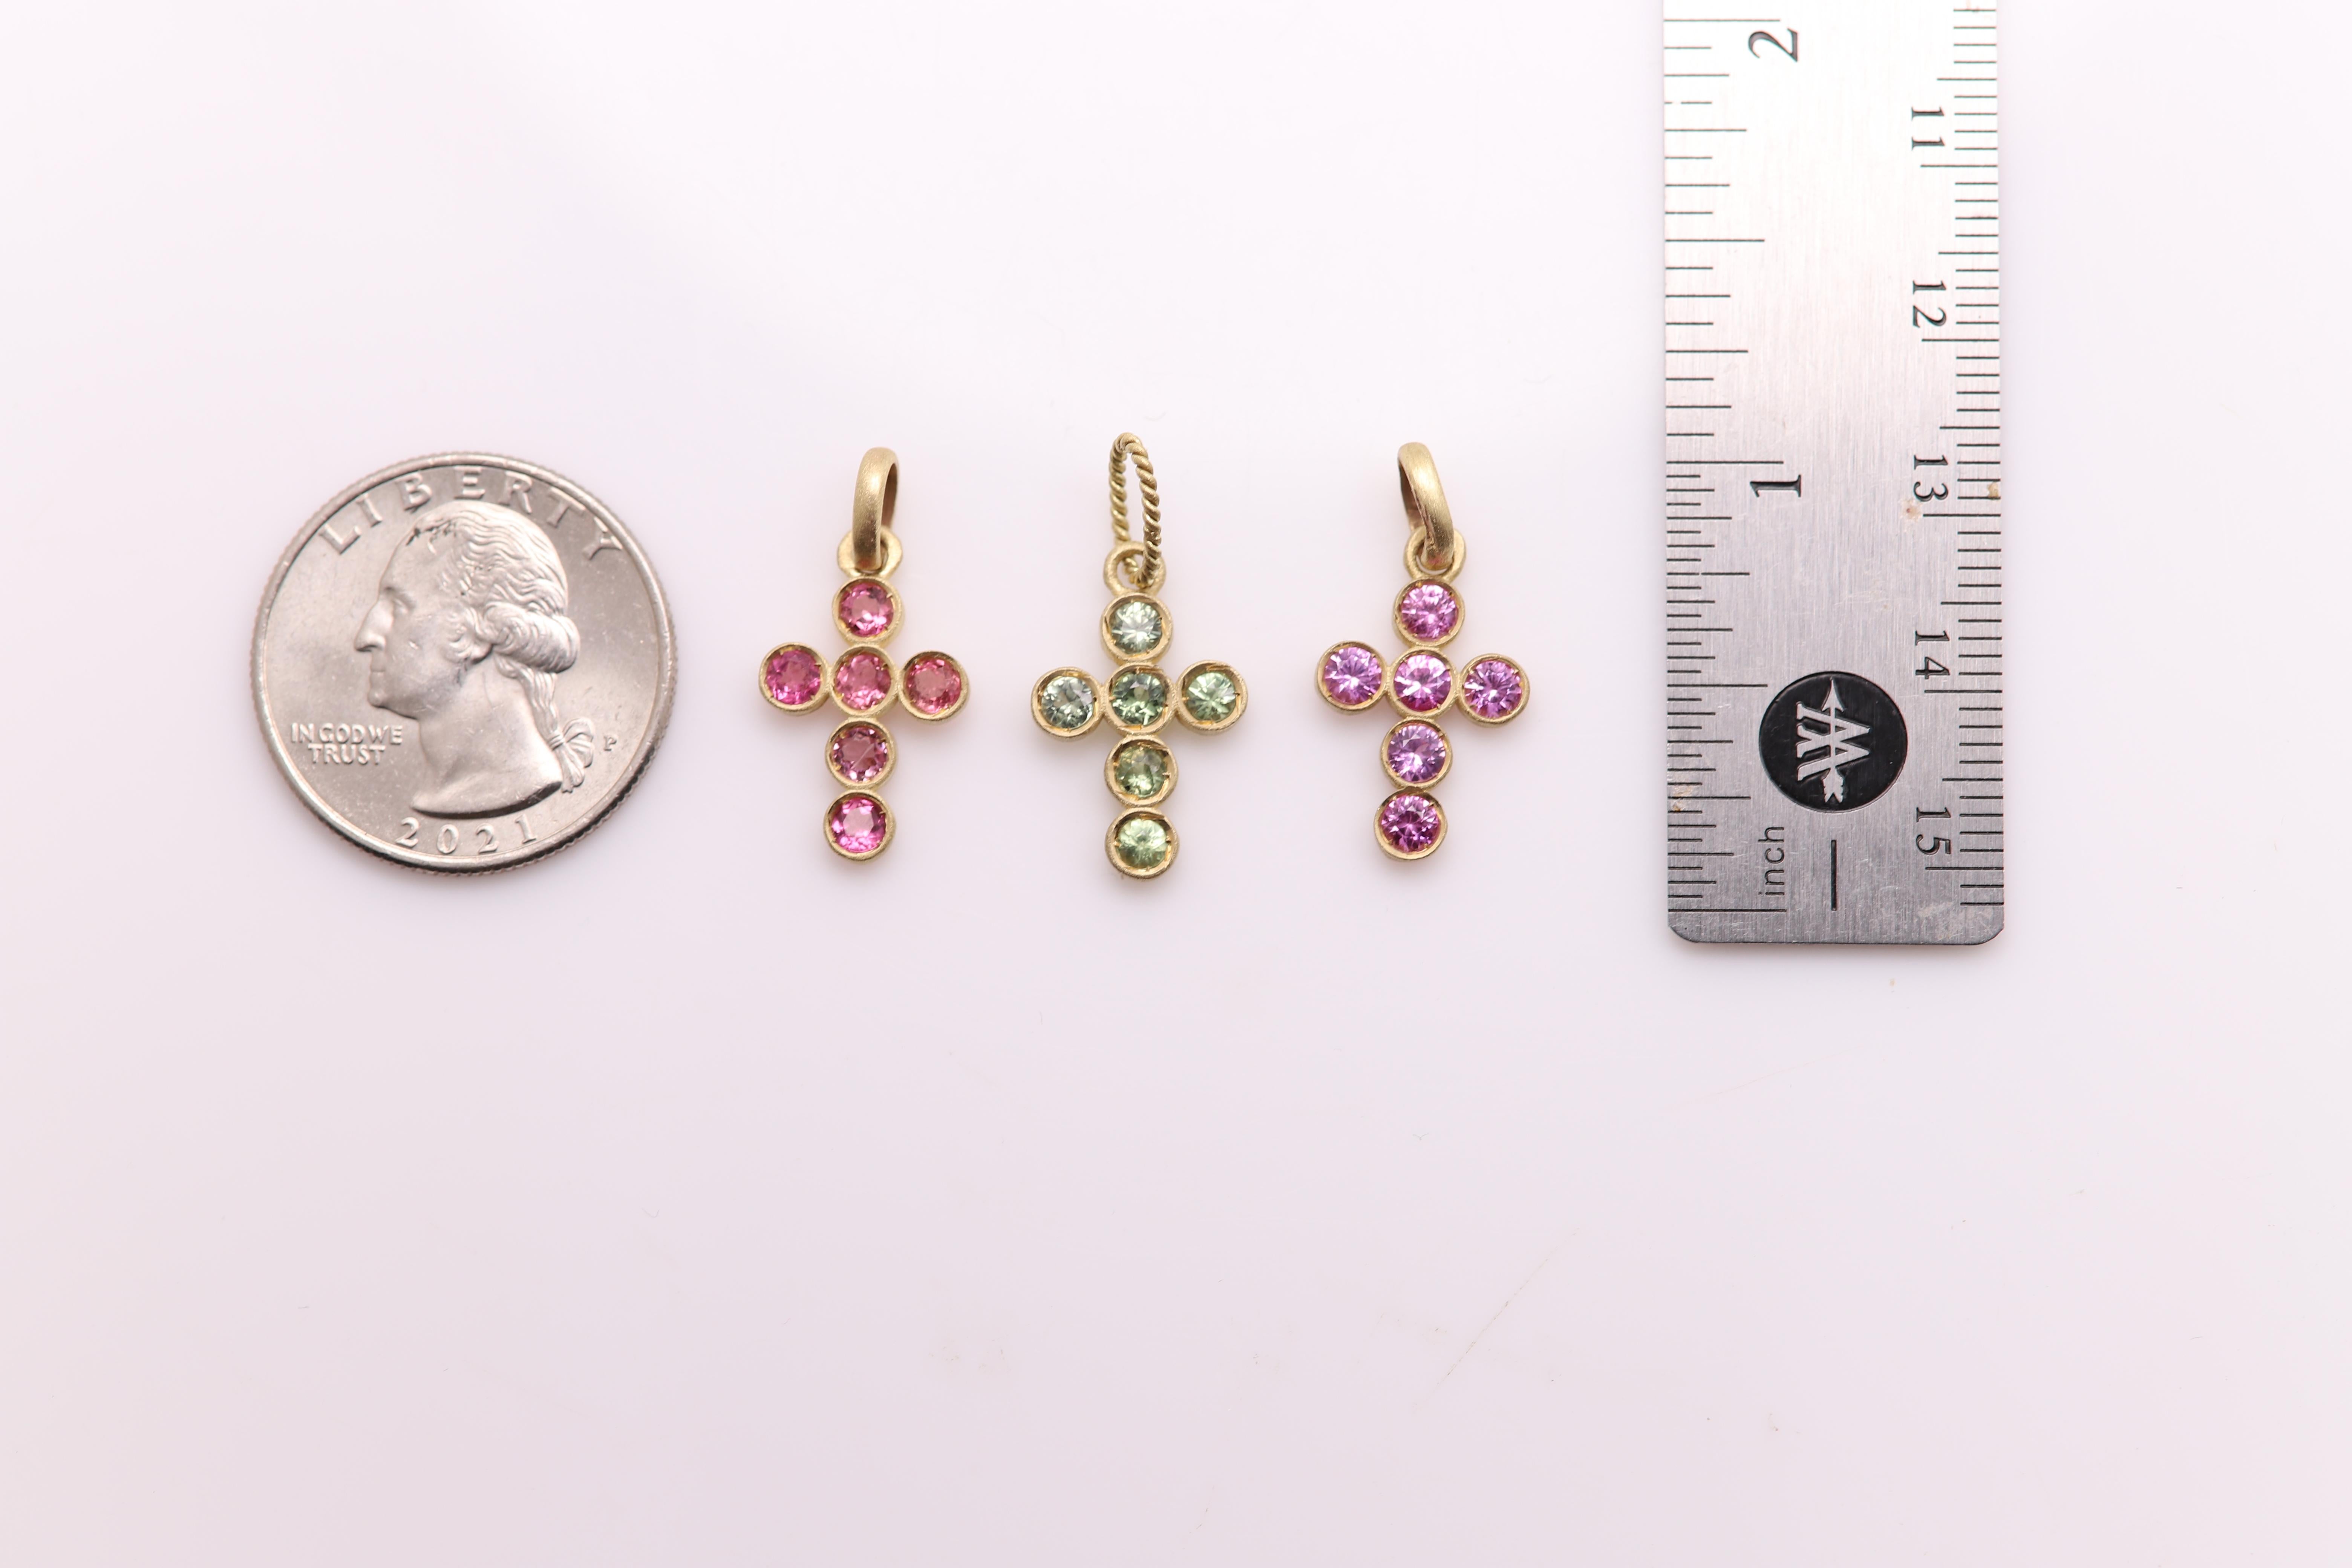 Brilliant crosses Pendants- set of three -somewhat vintage about 20 Years old
very nice color of gems - well made tourmaline gemstones(they sparkle as sapphires) 
1) pink
2) purple-ish
3) light green
Set in 14k yellow gold - brushed finish